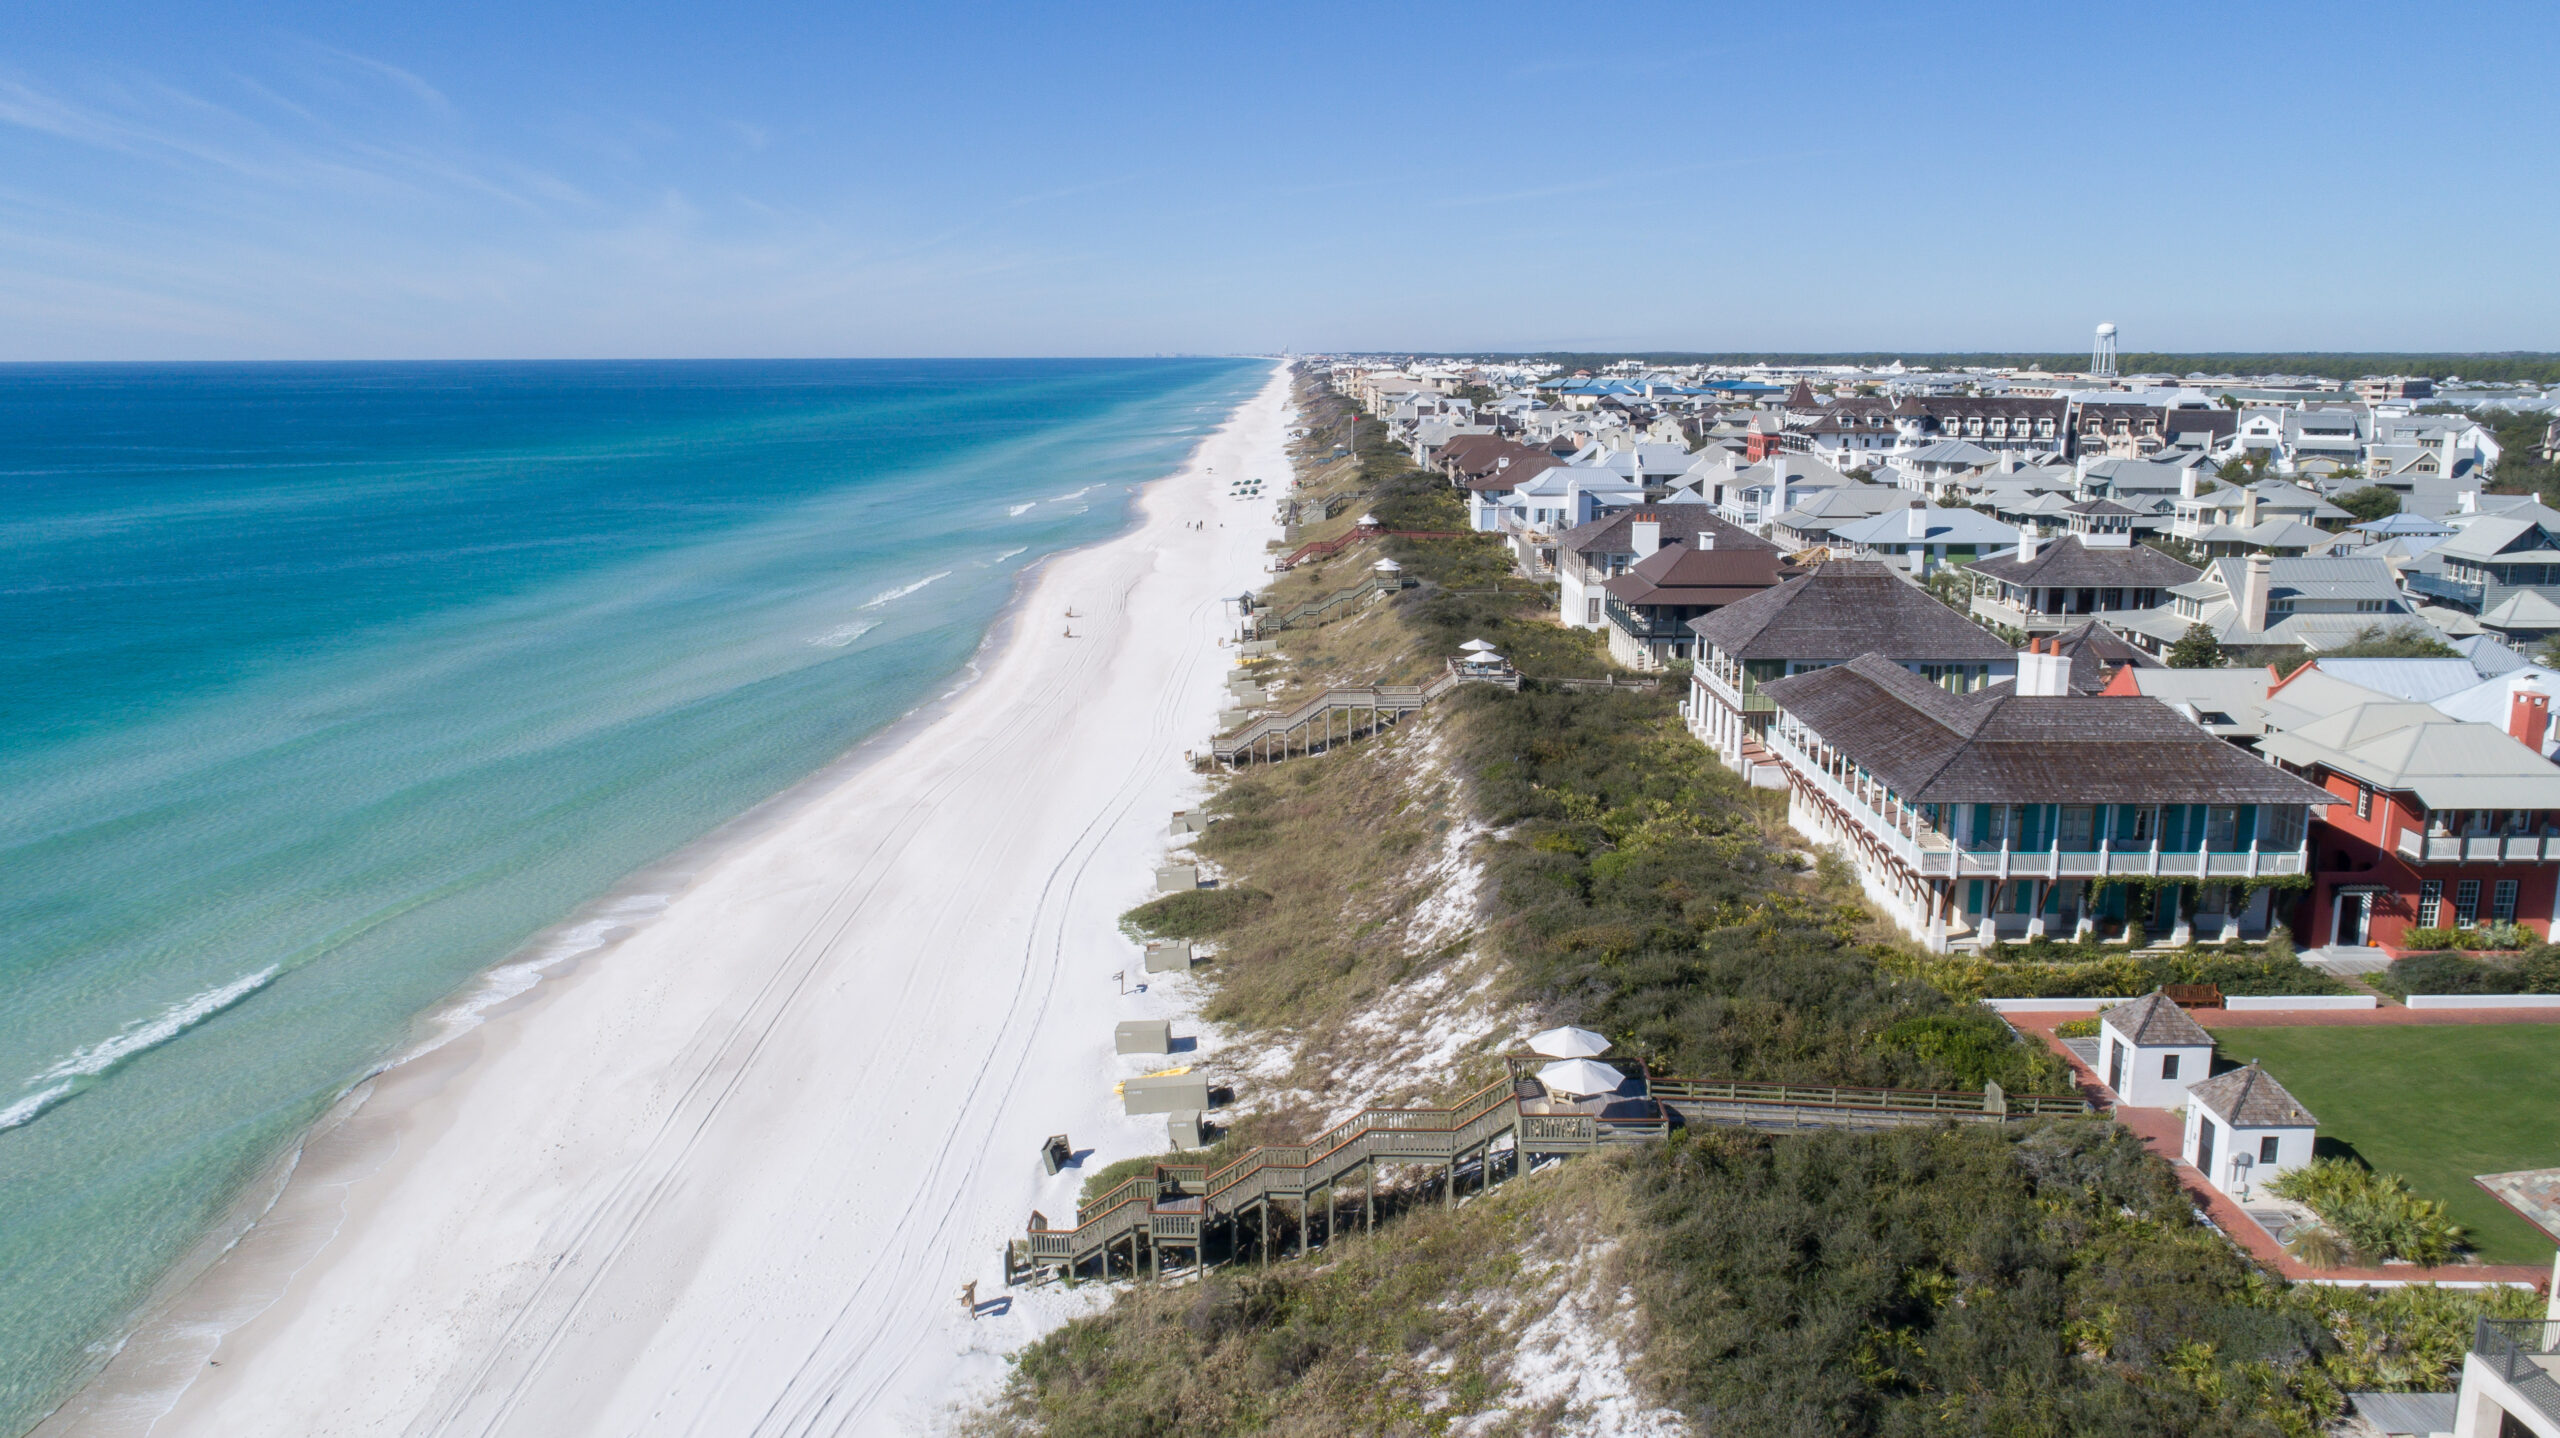 7 Unmissable Experiences for First-Time Visitors to 30A and Rosemary Beach